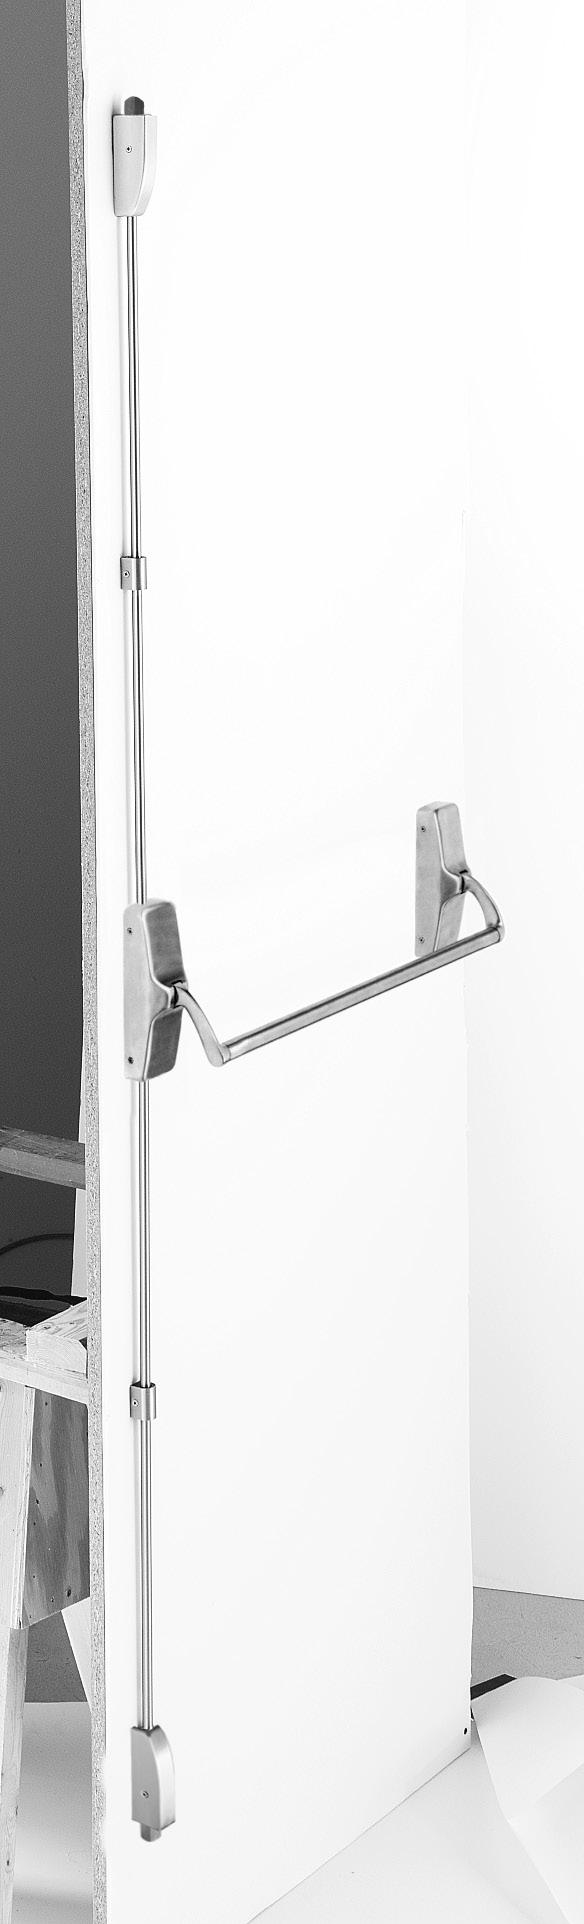 F-XX-V Series Reversible vertical rod device Fire exit hardware The Falcon F-XX-V Series fire rated vertical rod device is designed to meet the demanding requirements of higher traffic installations.